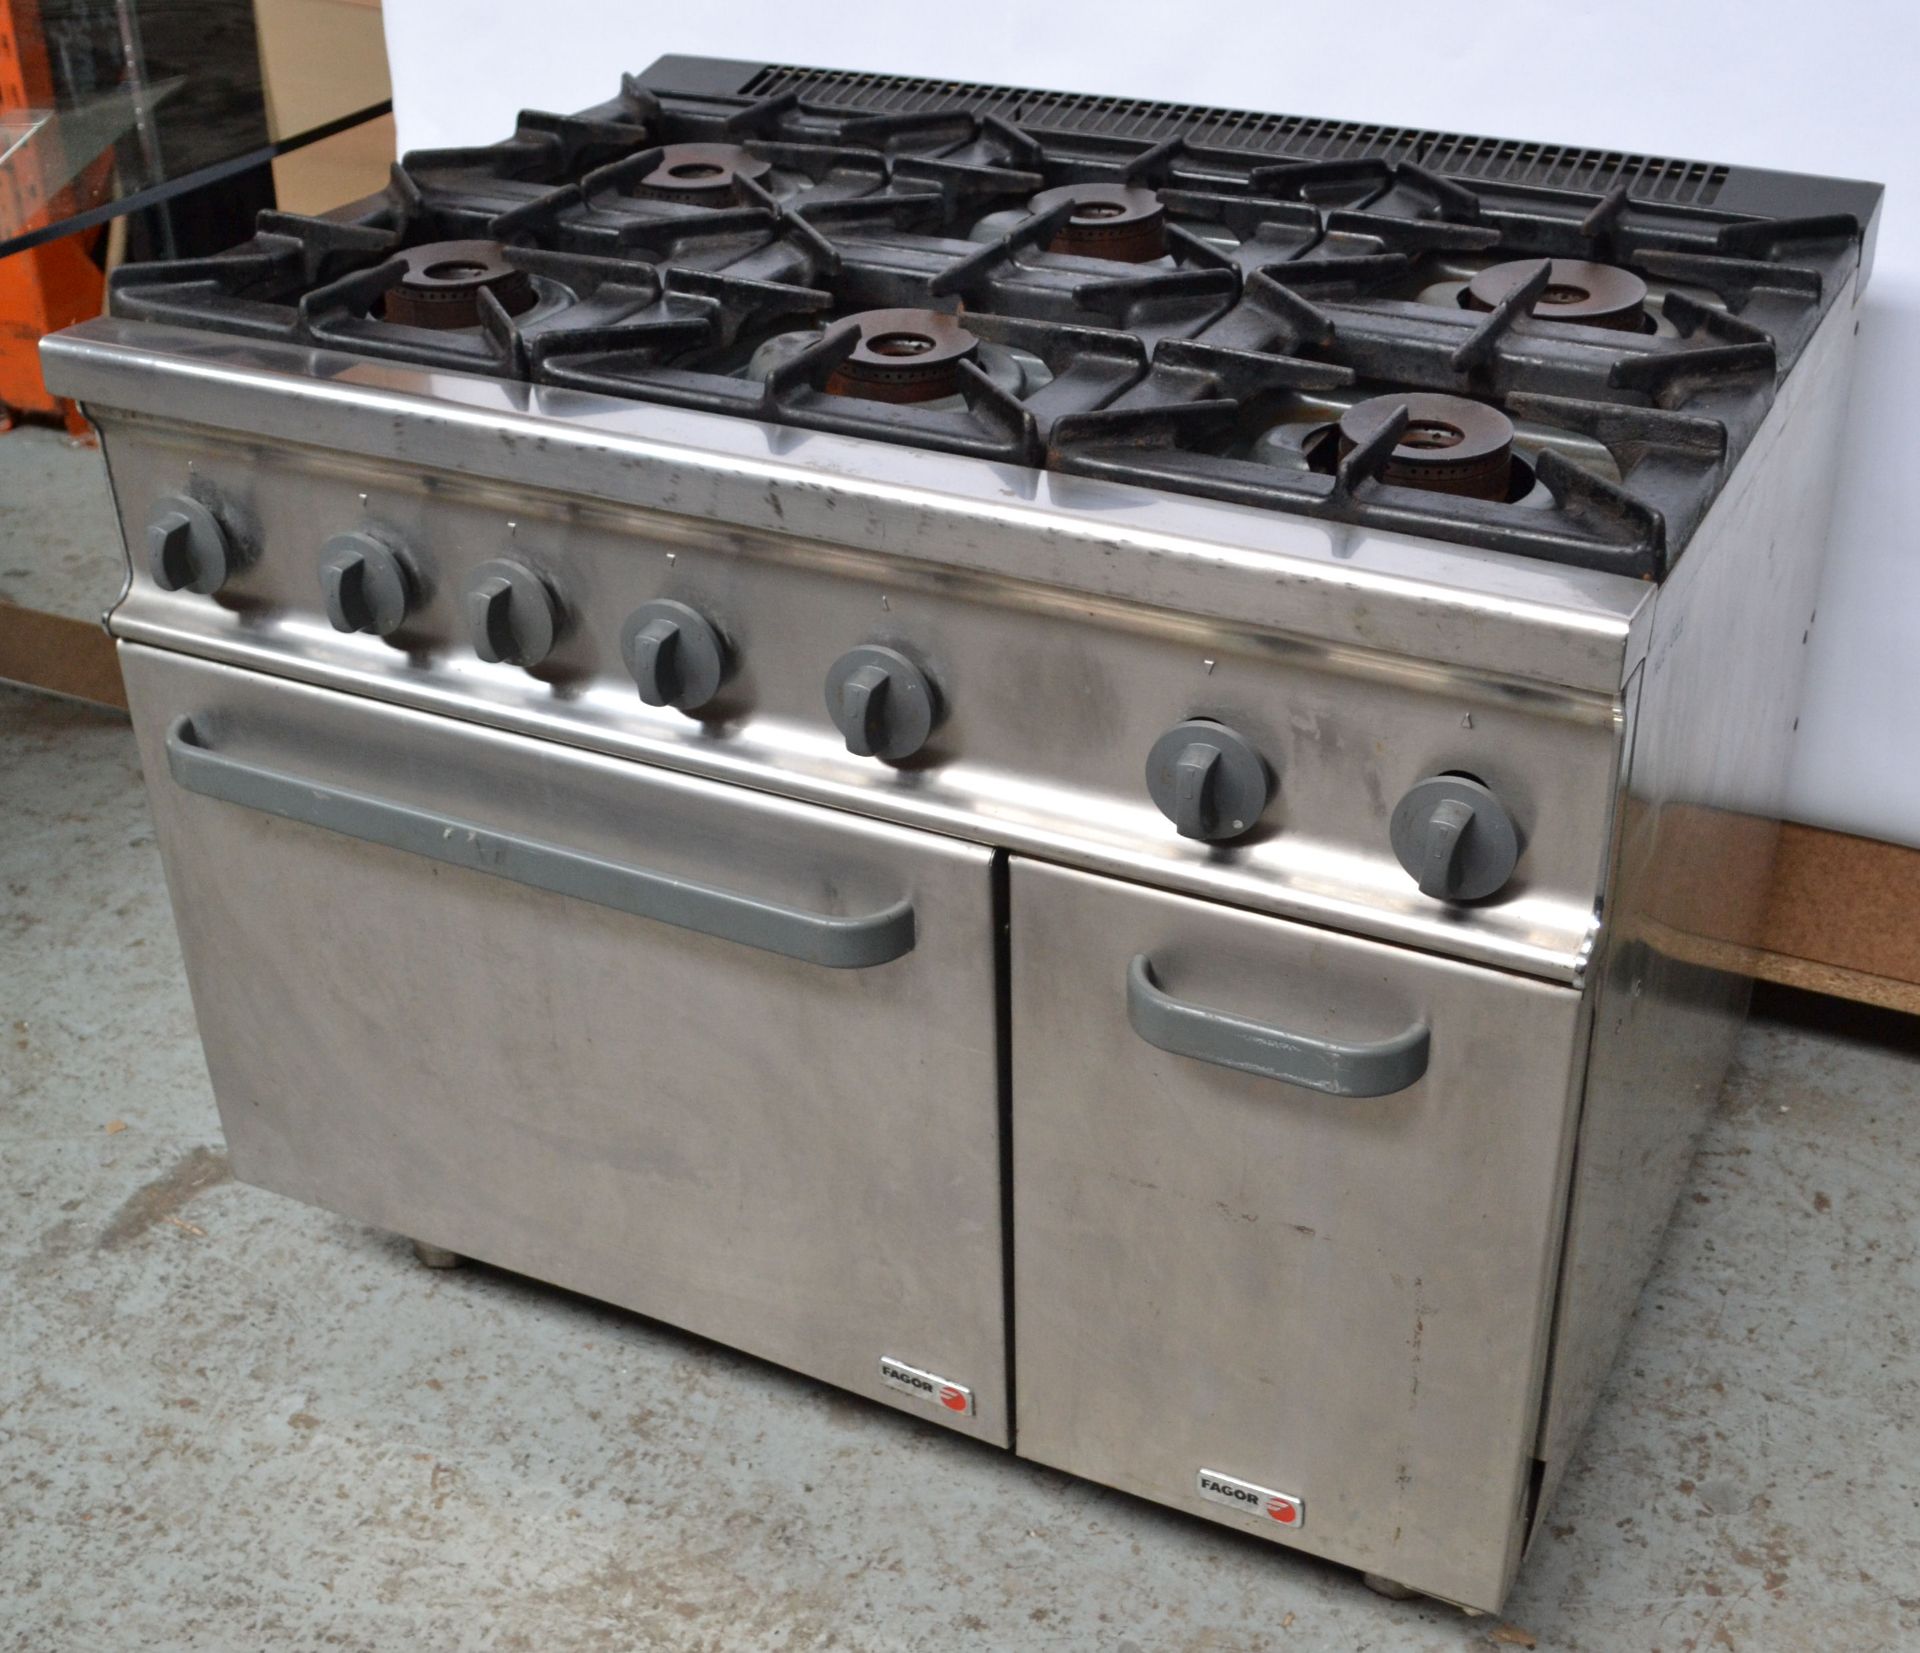 1 x Fagor Six Burner Gas Oven Range (CG-761 BR SM) - Ref NCE011 - CL178 - Location: Altrincham - Image 4 of 15